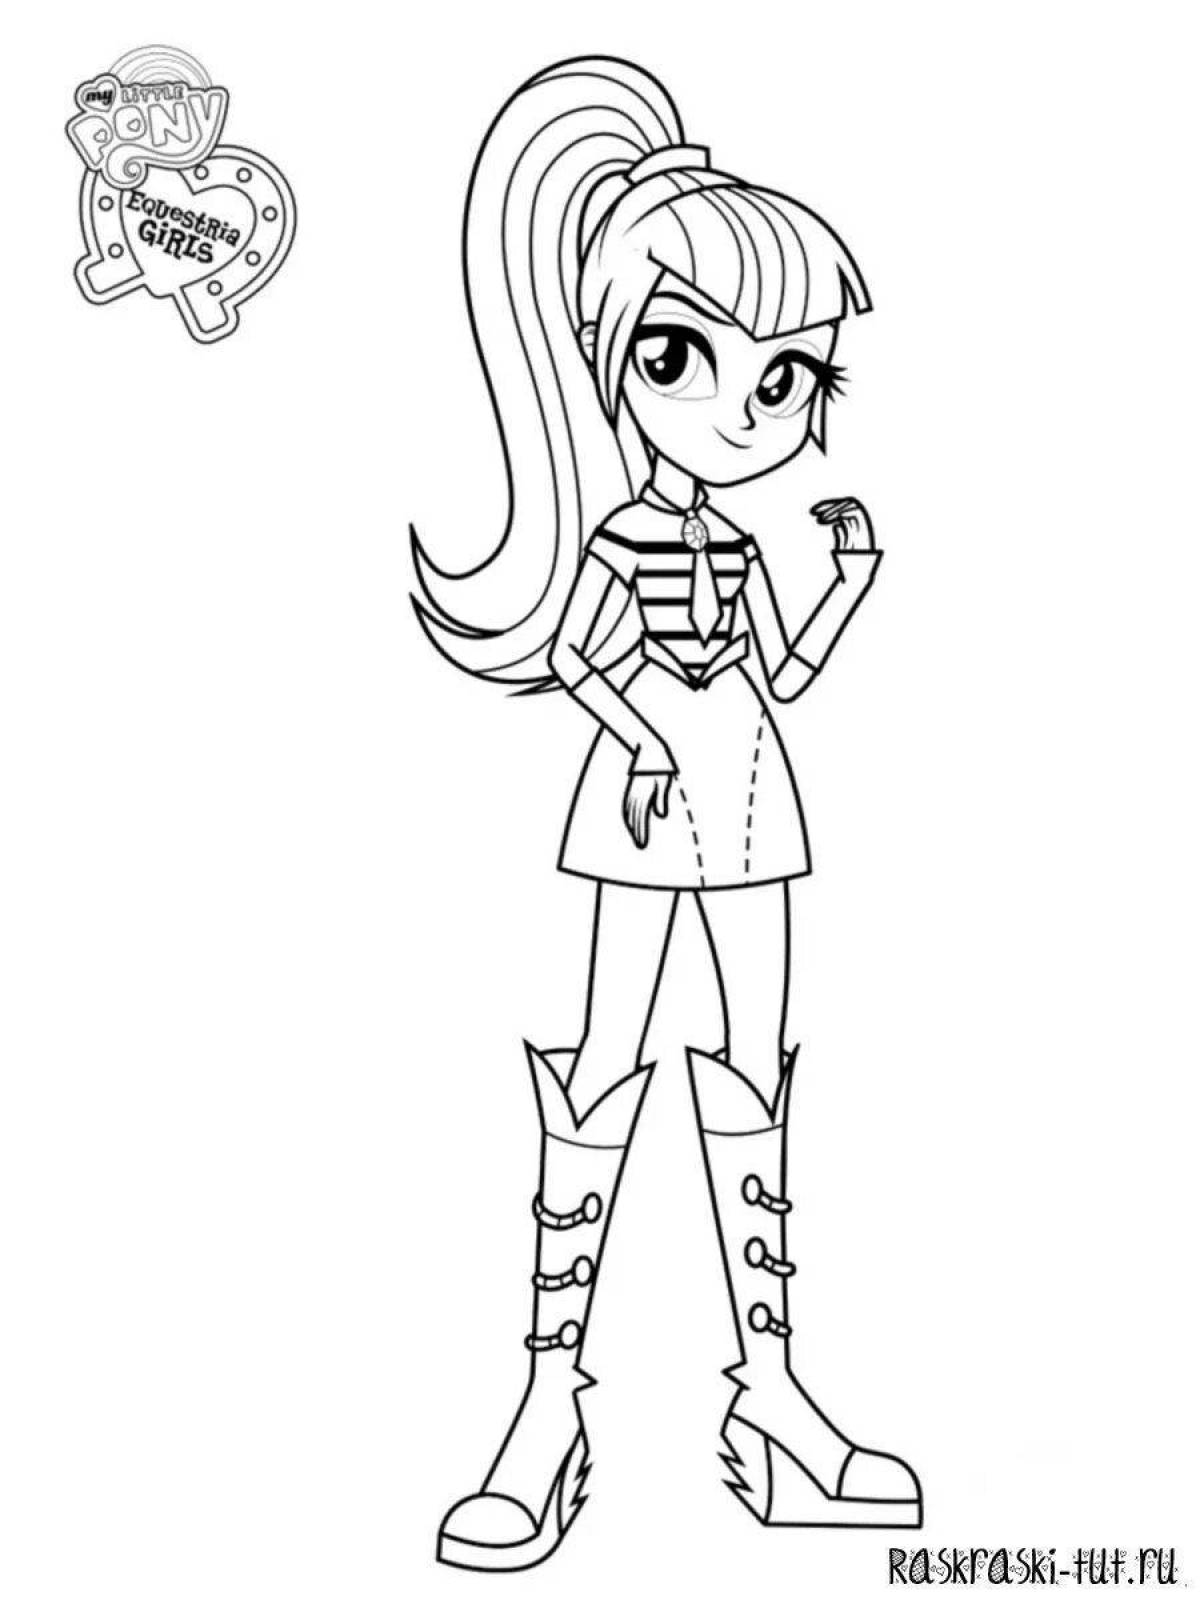 Glittering little pony coloring page for girls